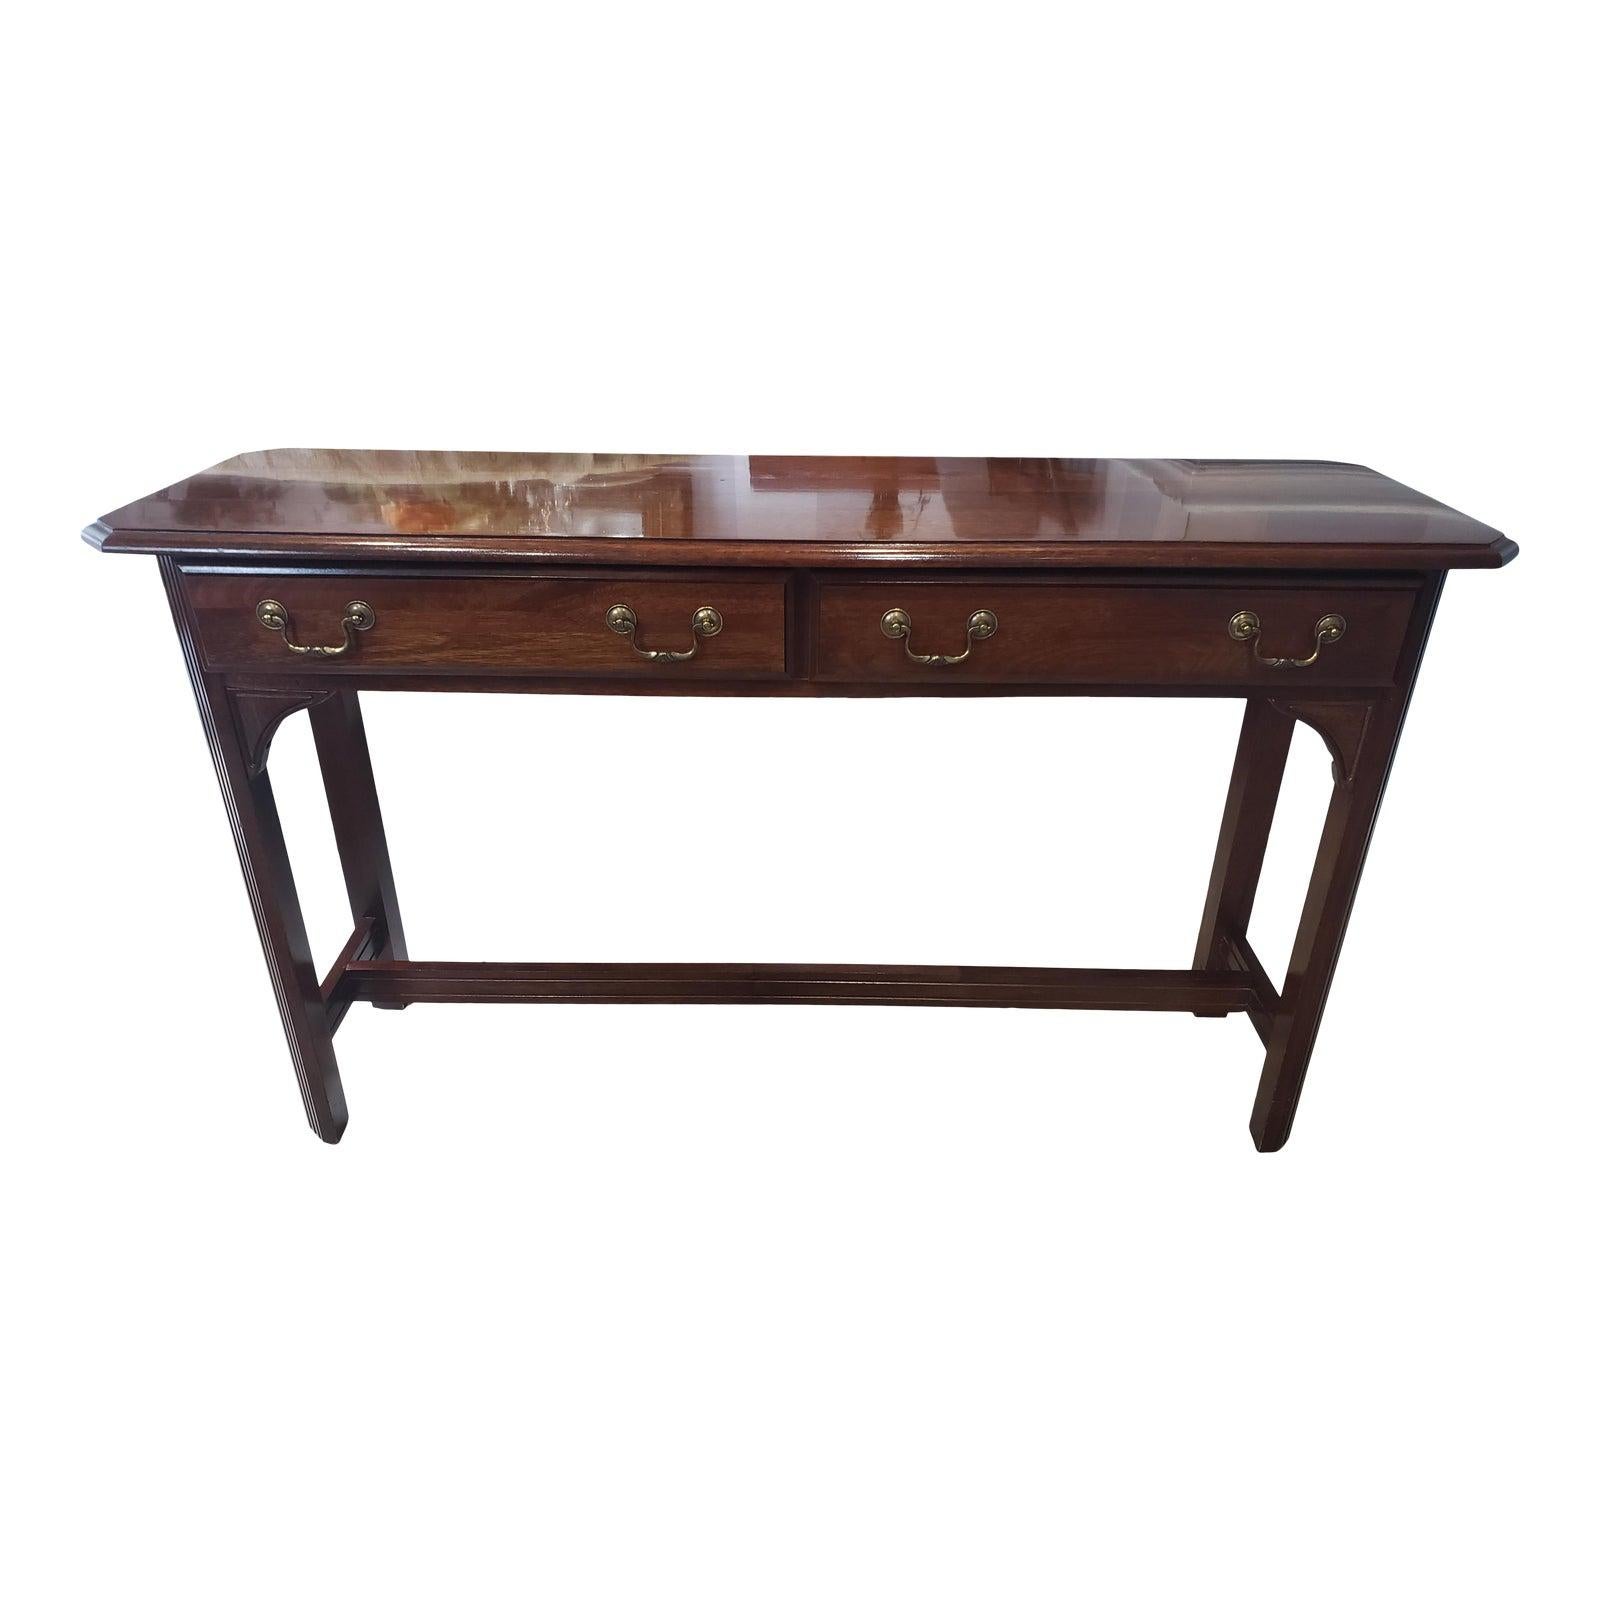 1970s Kincaid English Chippendale Solid Mahogany Console Table